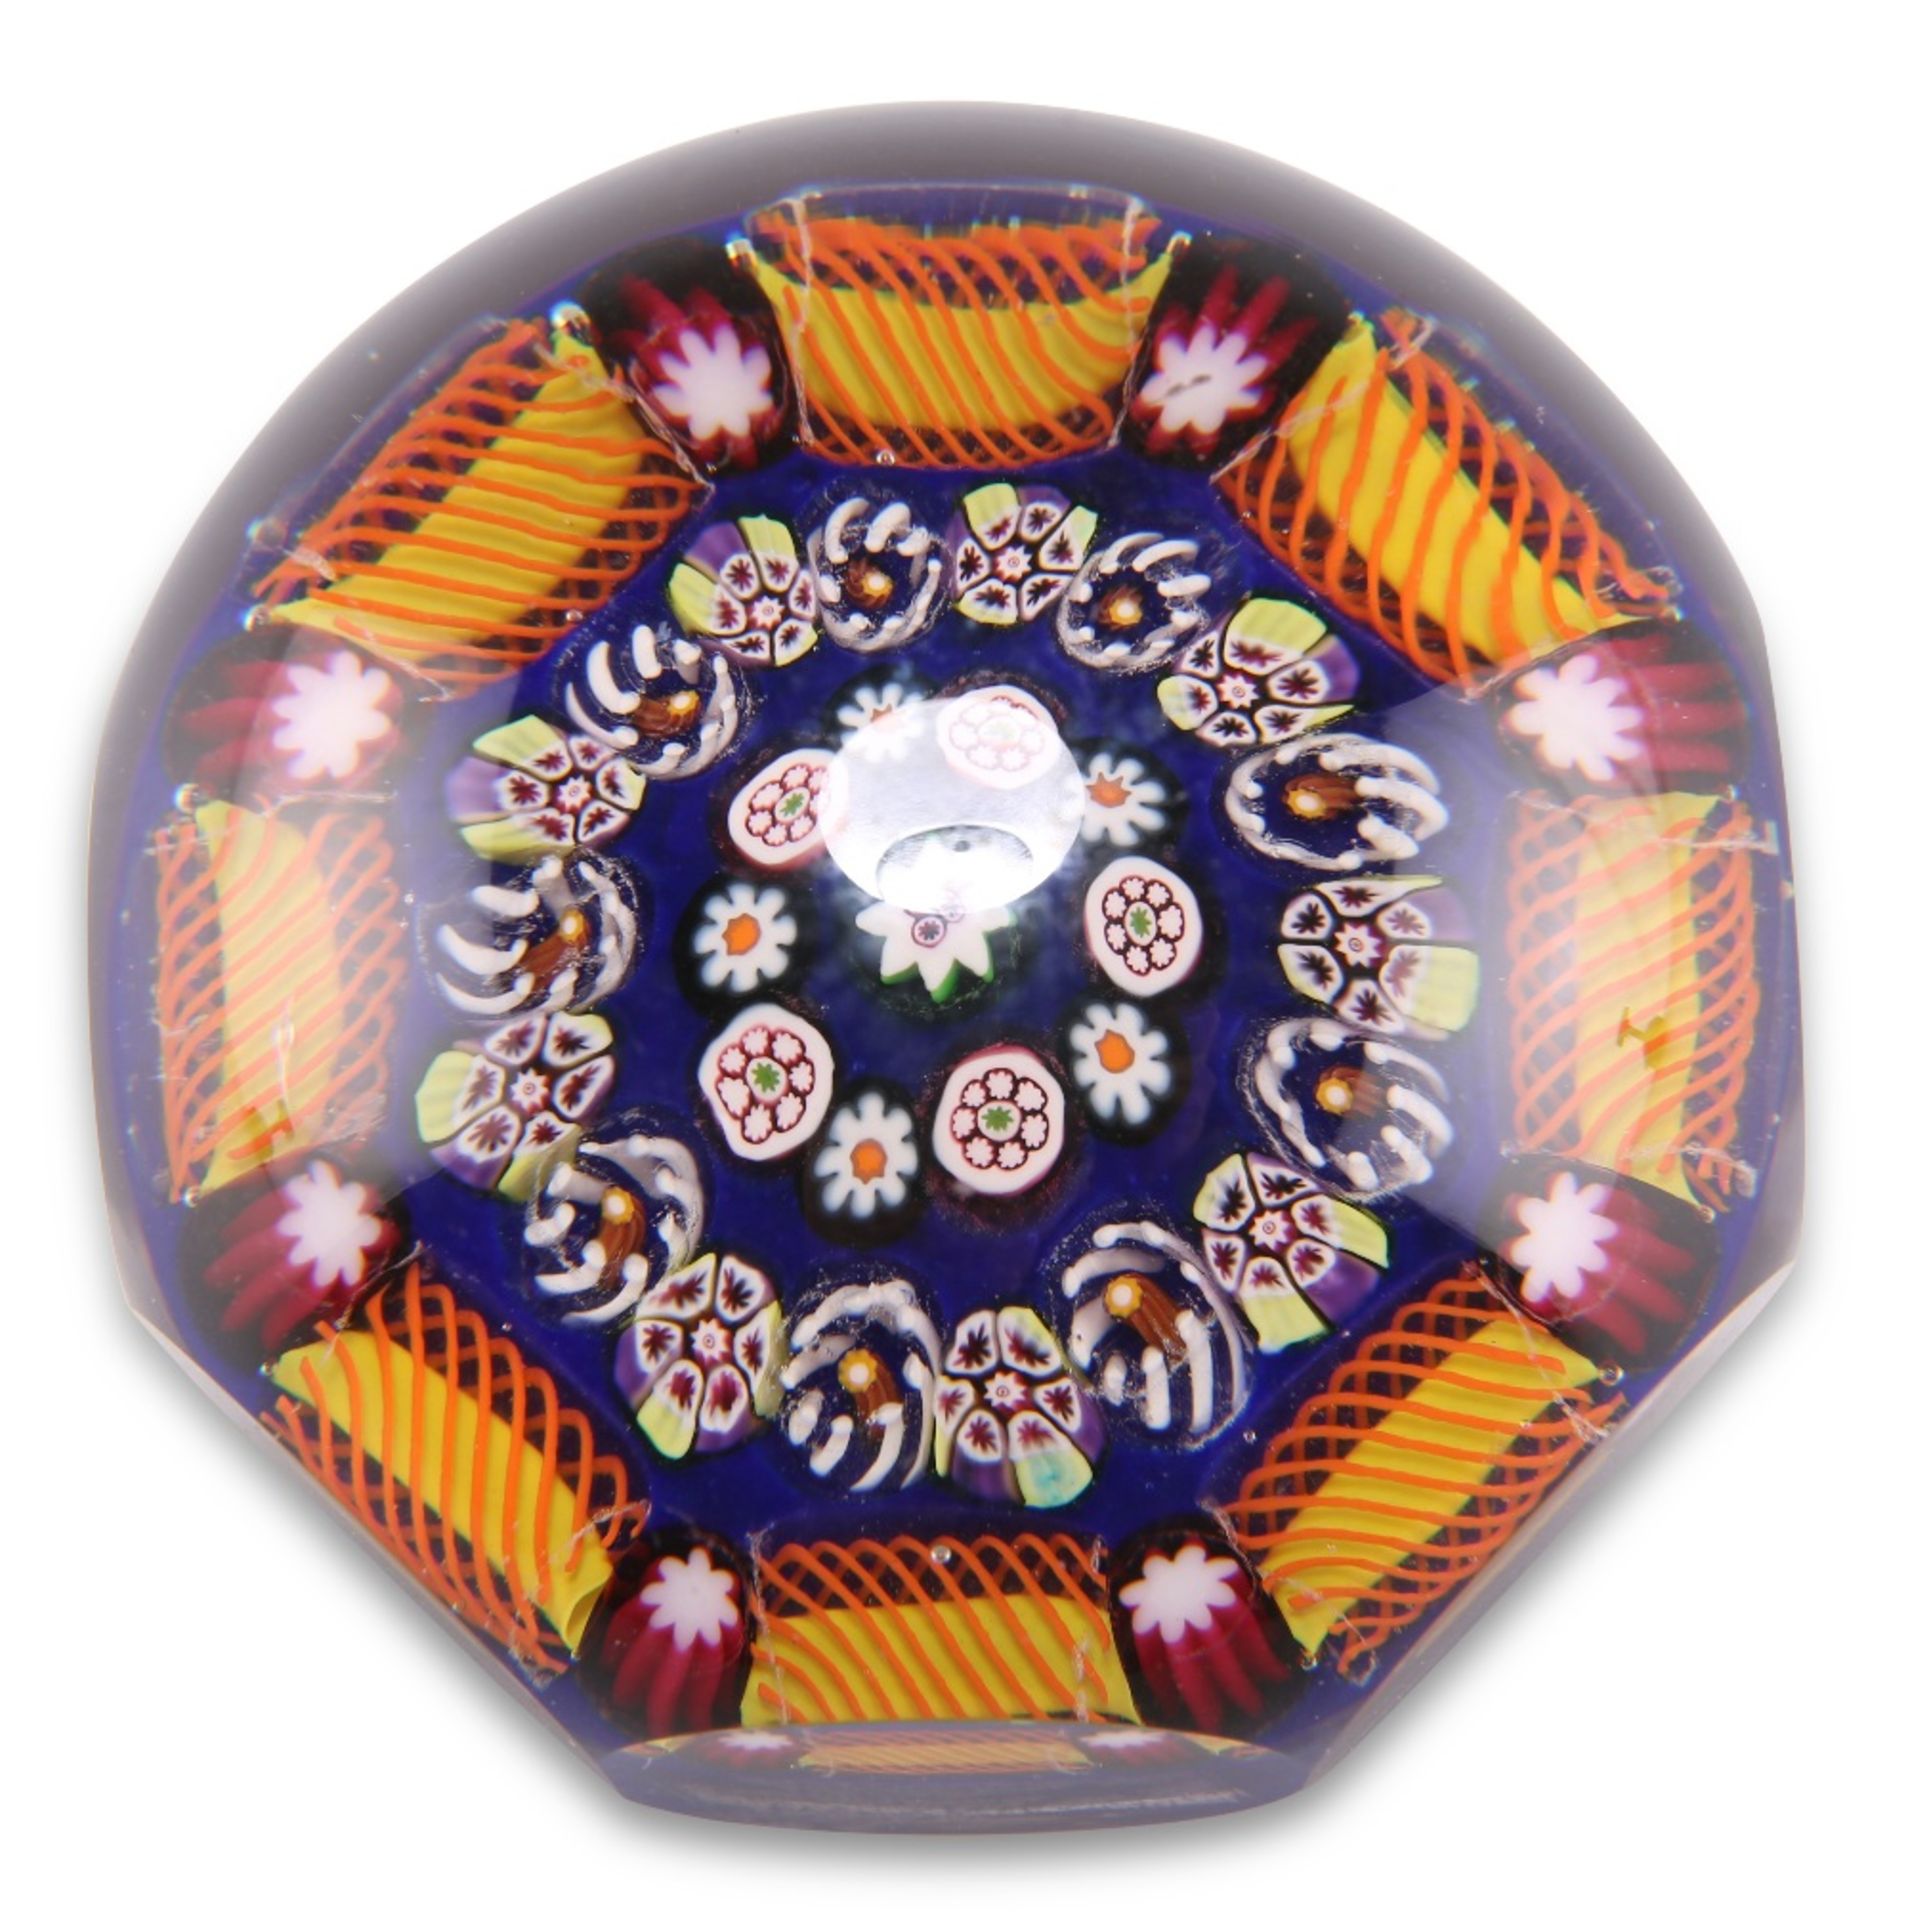 A PAUL YSART MILLEFIORI GLASS PAPERWEIGHT, CIRCA 1930S, octagonal faceted design with concentric